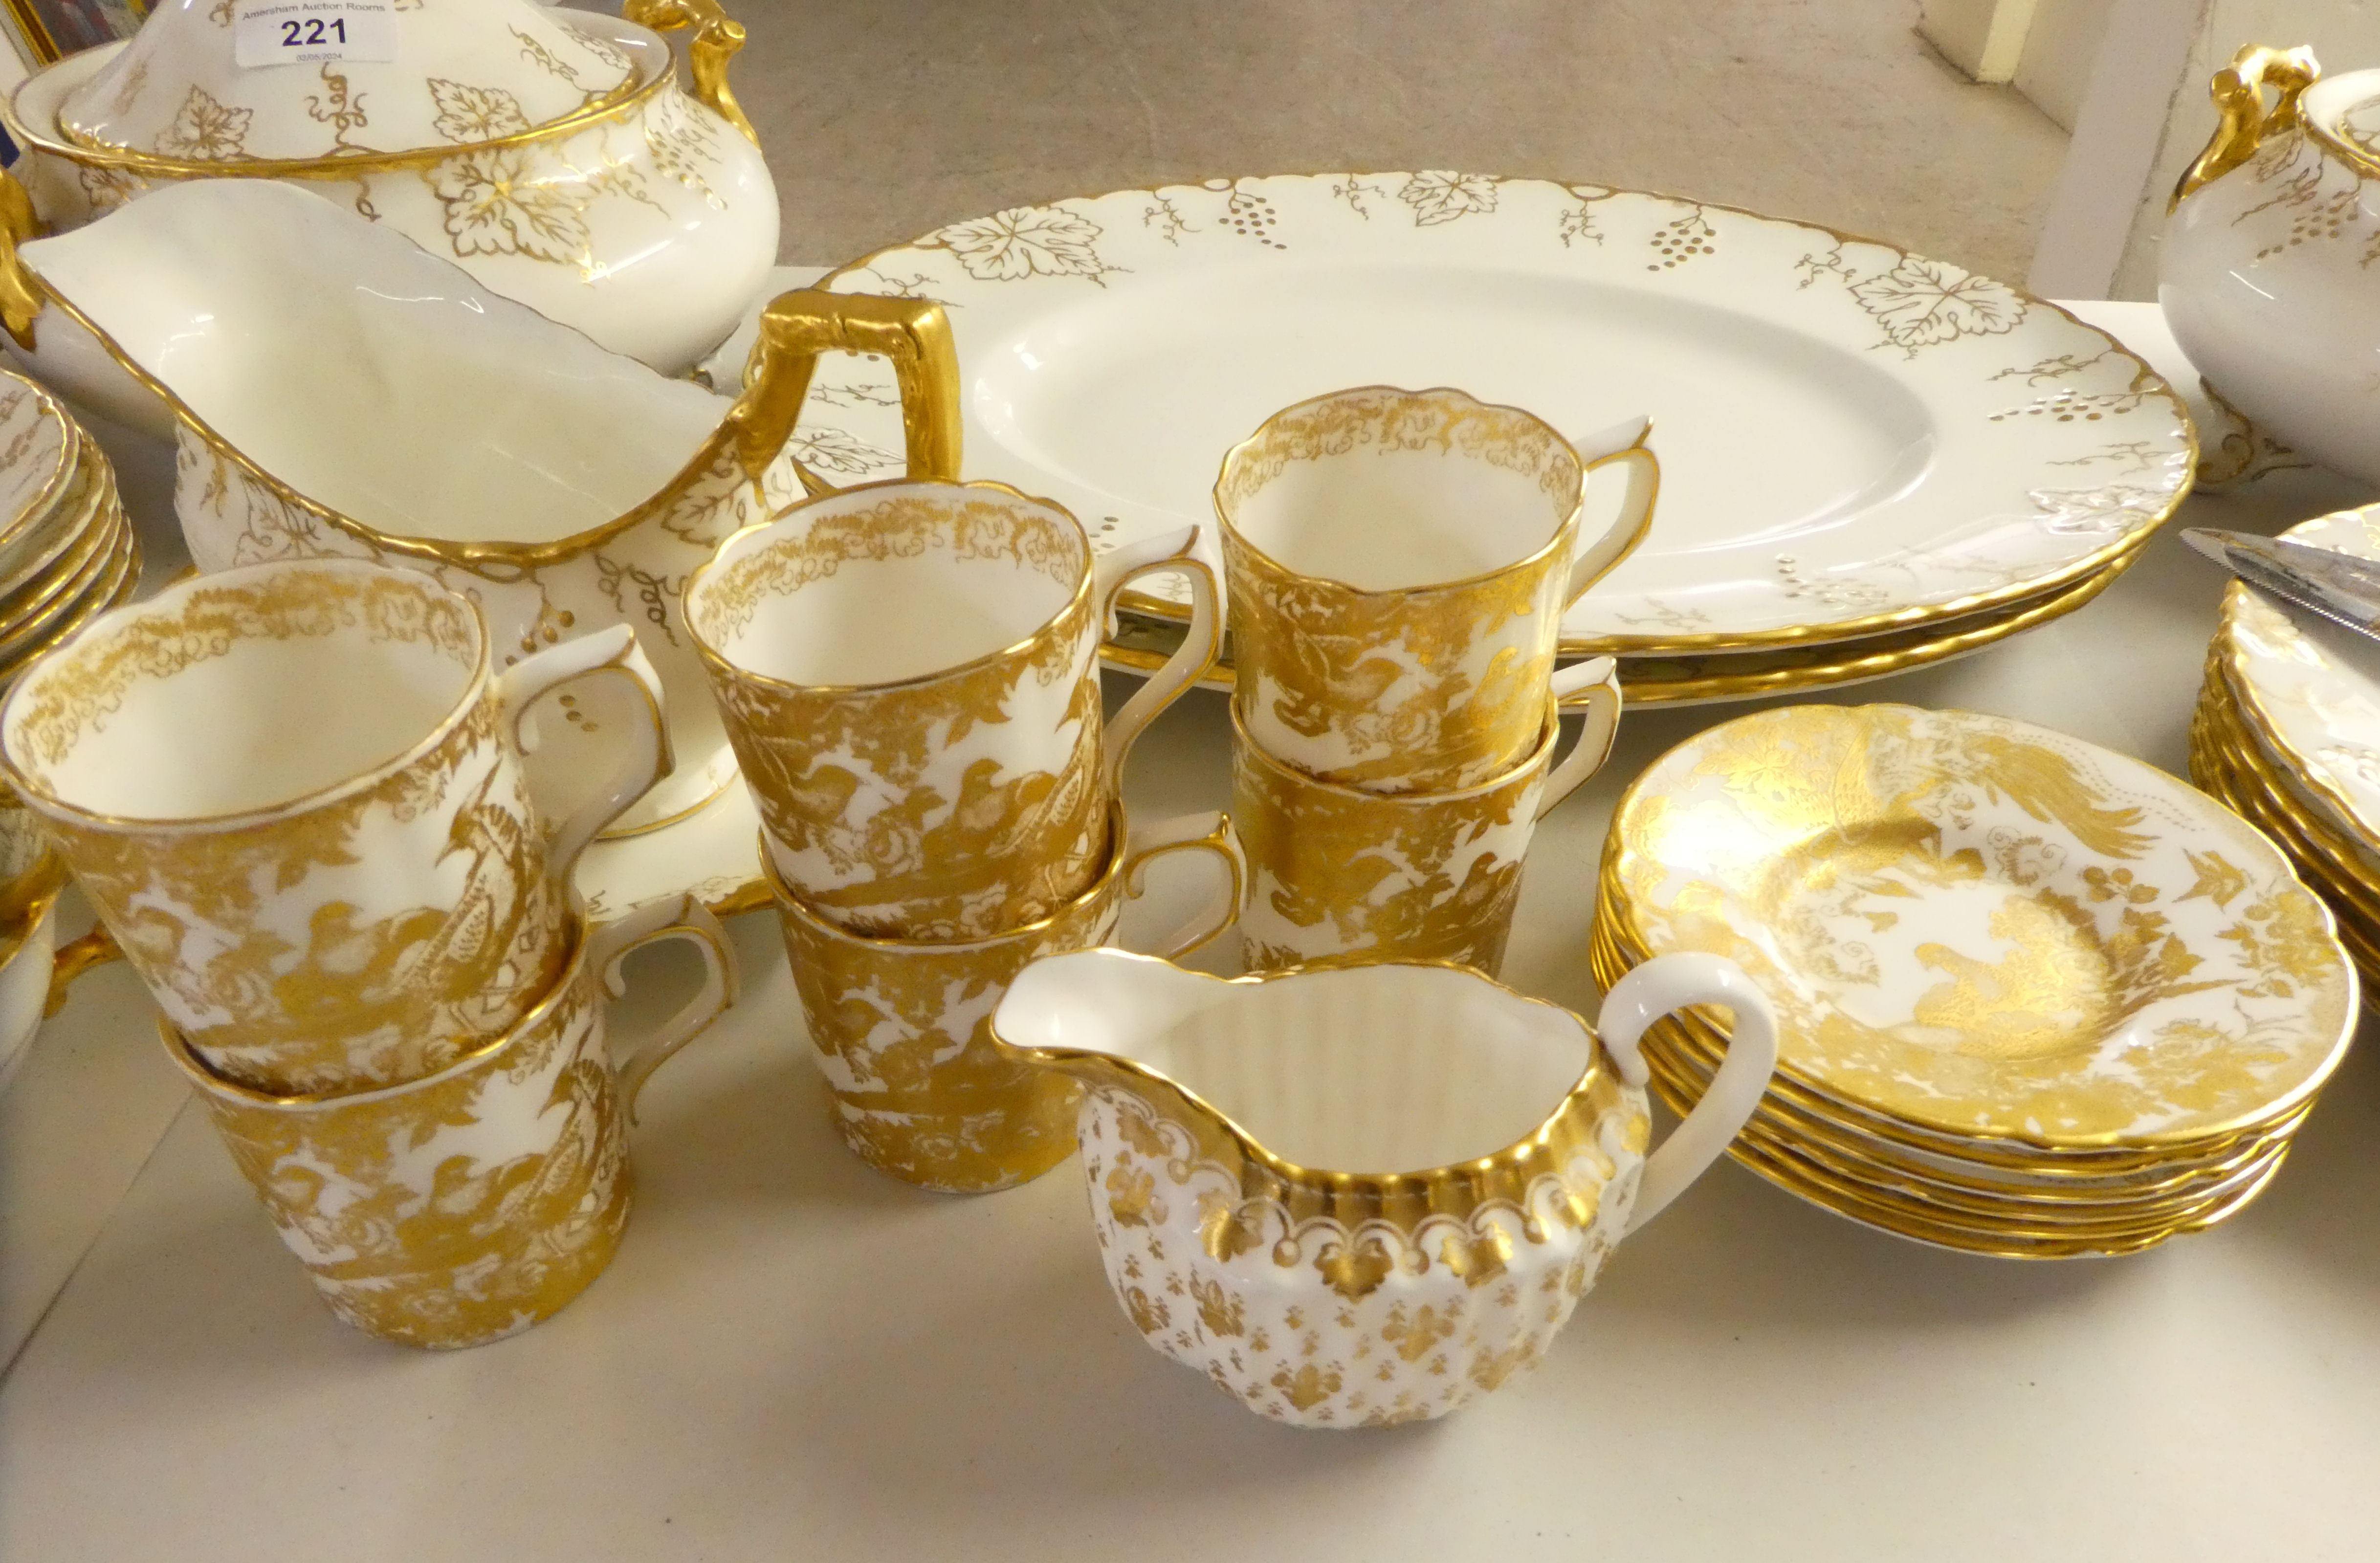 Two similar patterns of Royal Crown Derby china tea/dinnerware, highlighted with gilding - Image 3 of 4